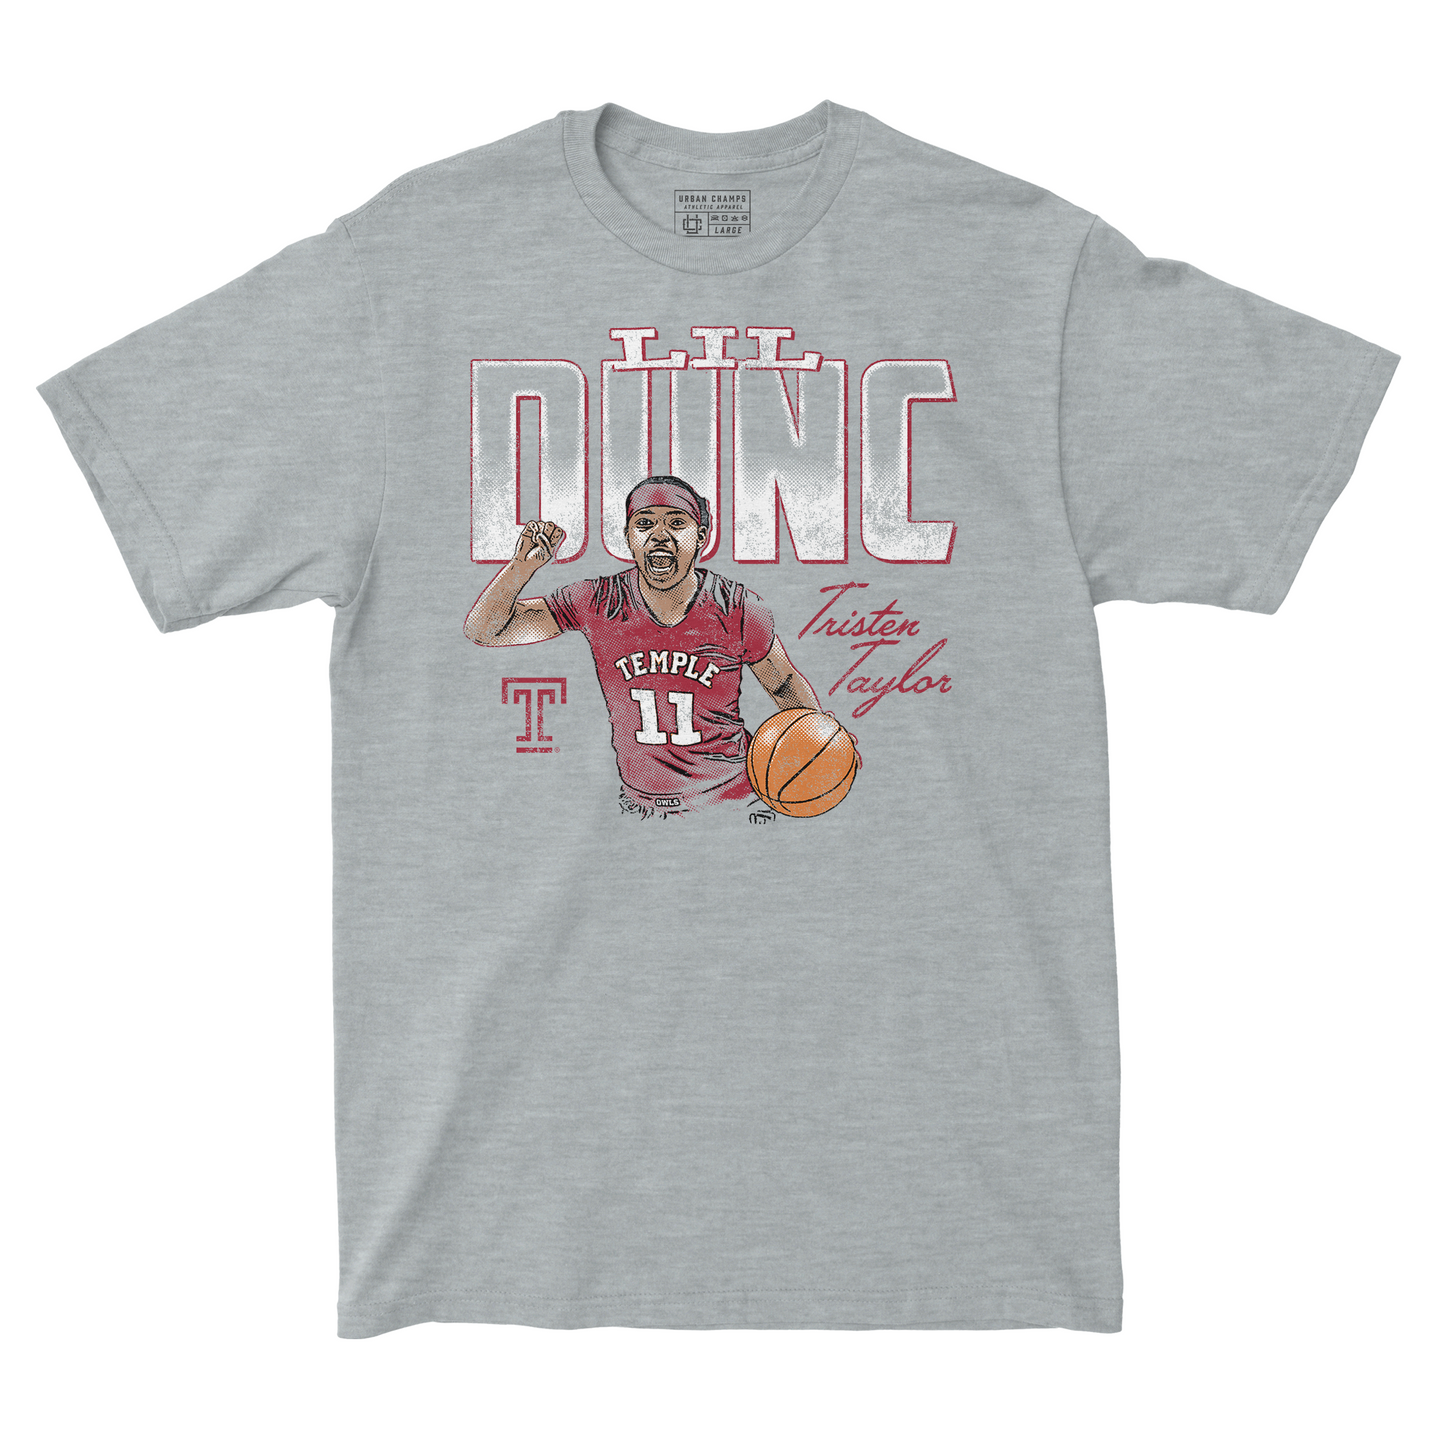 EXCLUSIVE RELEASE: Tristen Taylor - Lil Dunc Tee